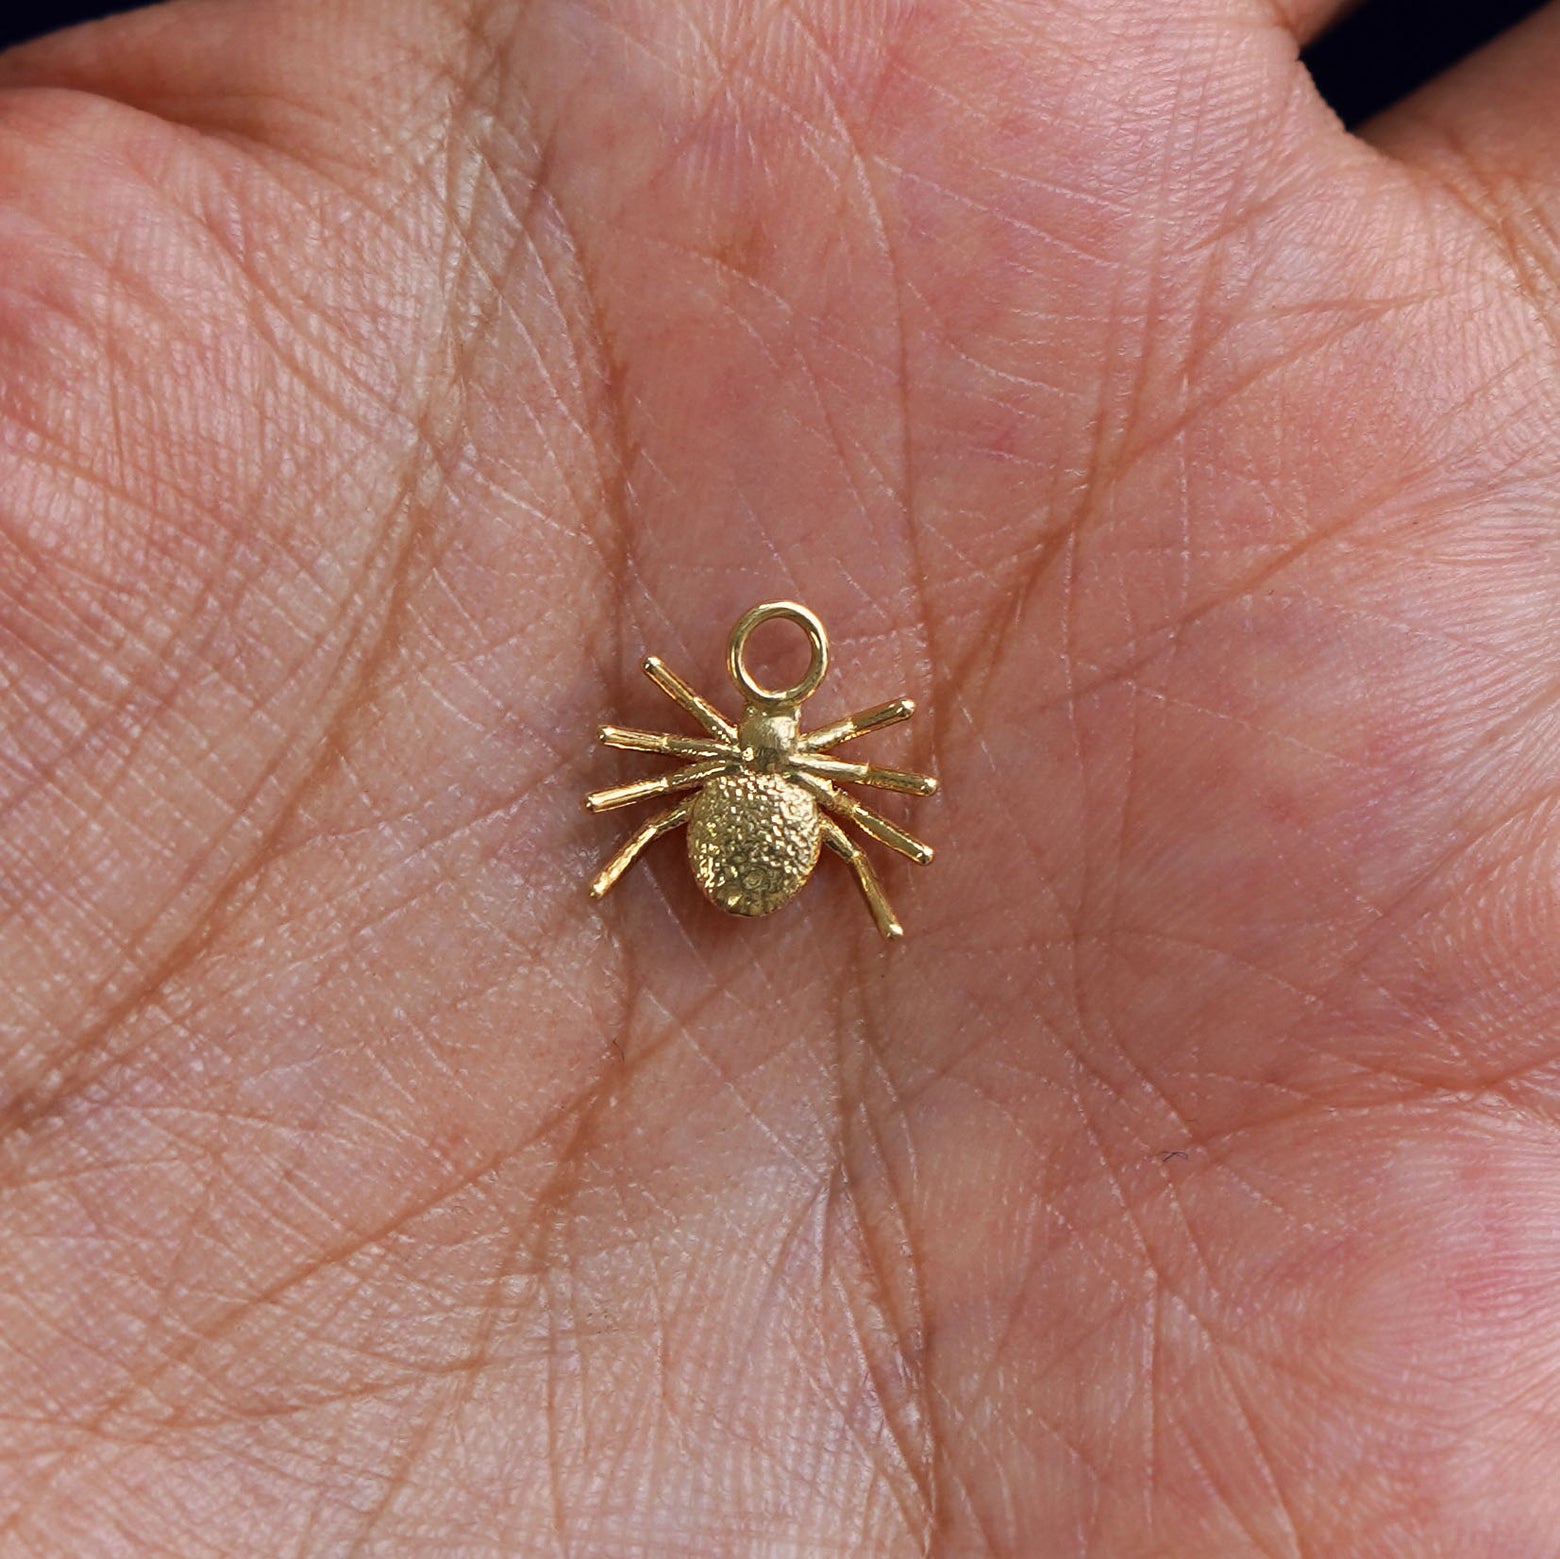 A 14k gold Spider Charm for earring resting in a model's palm to show the underside of the charm